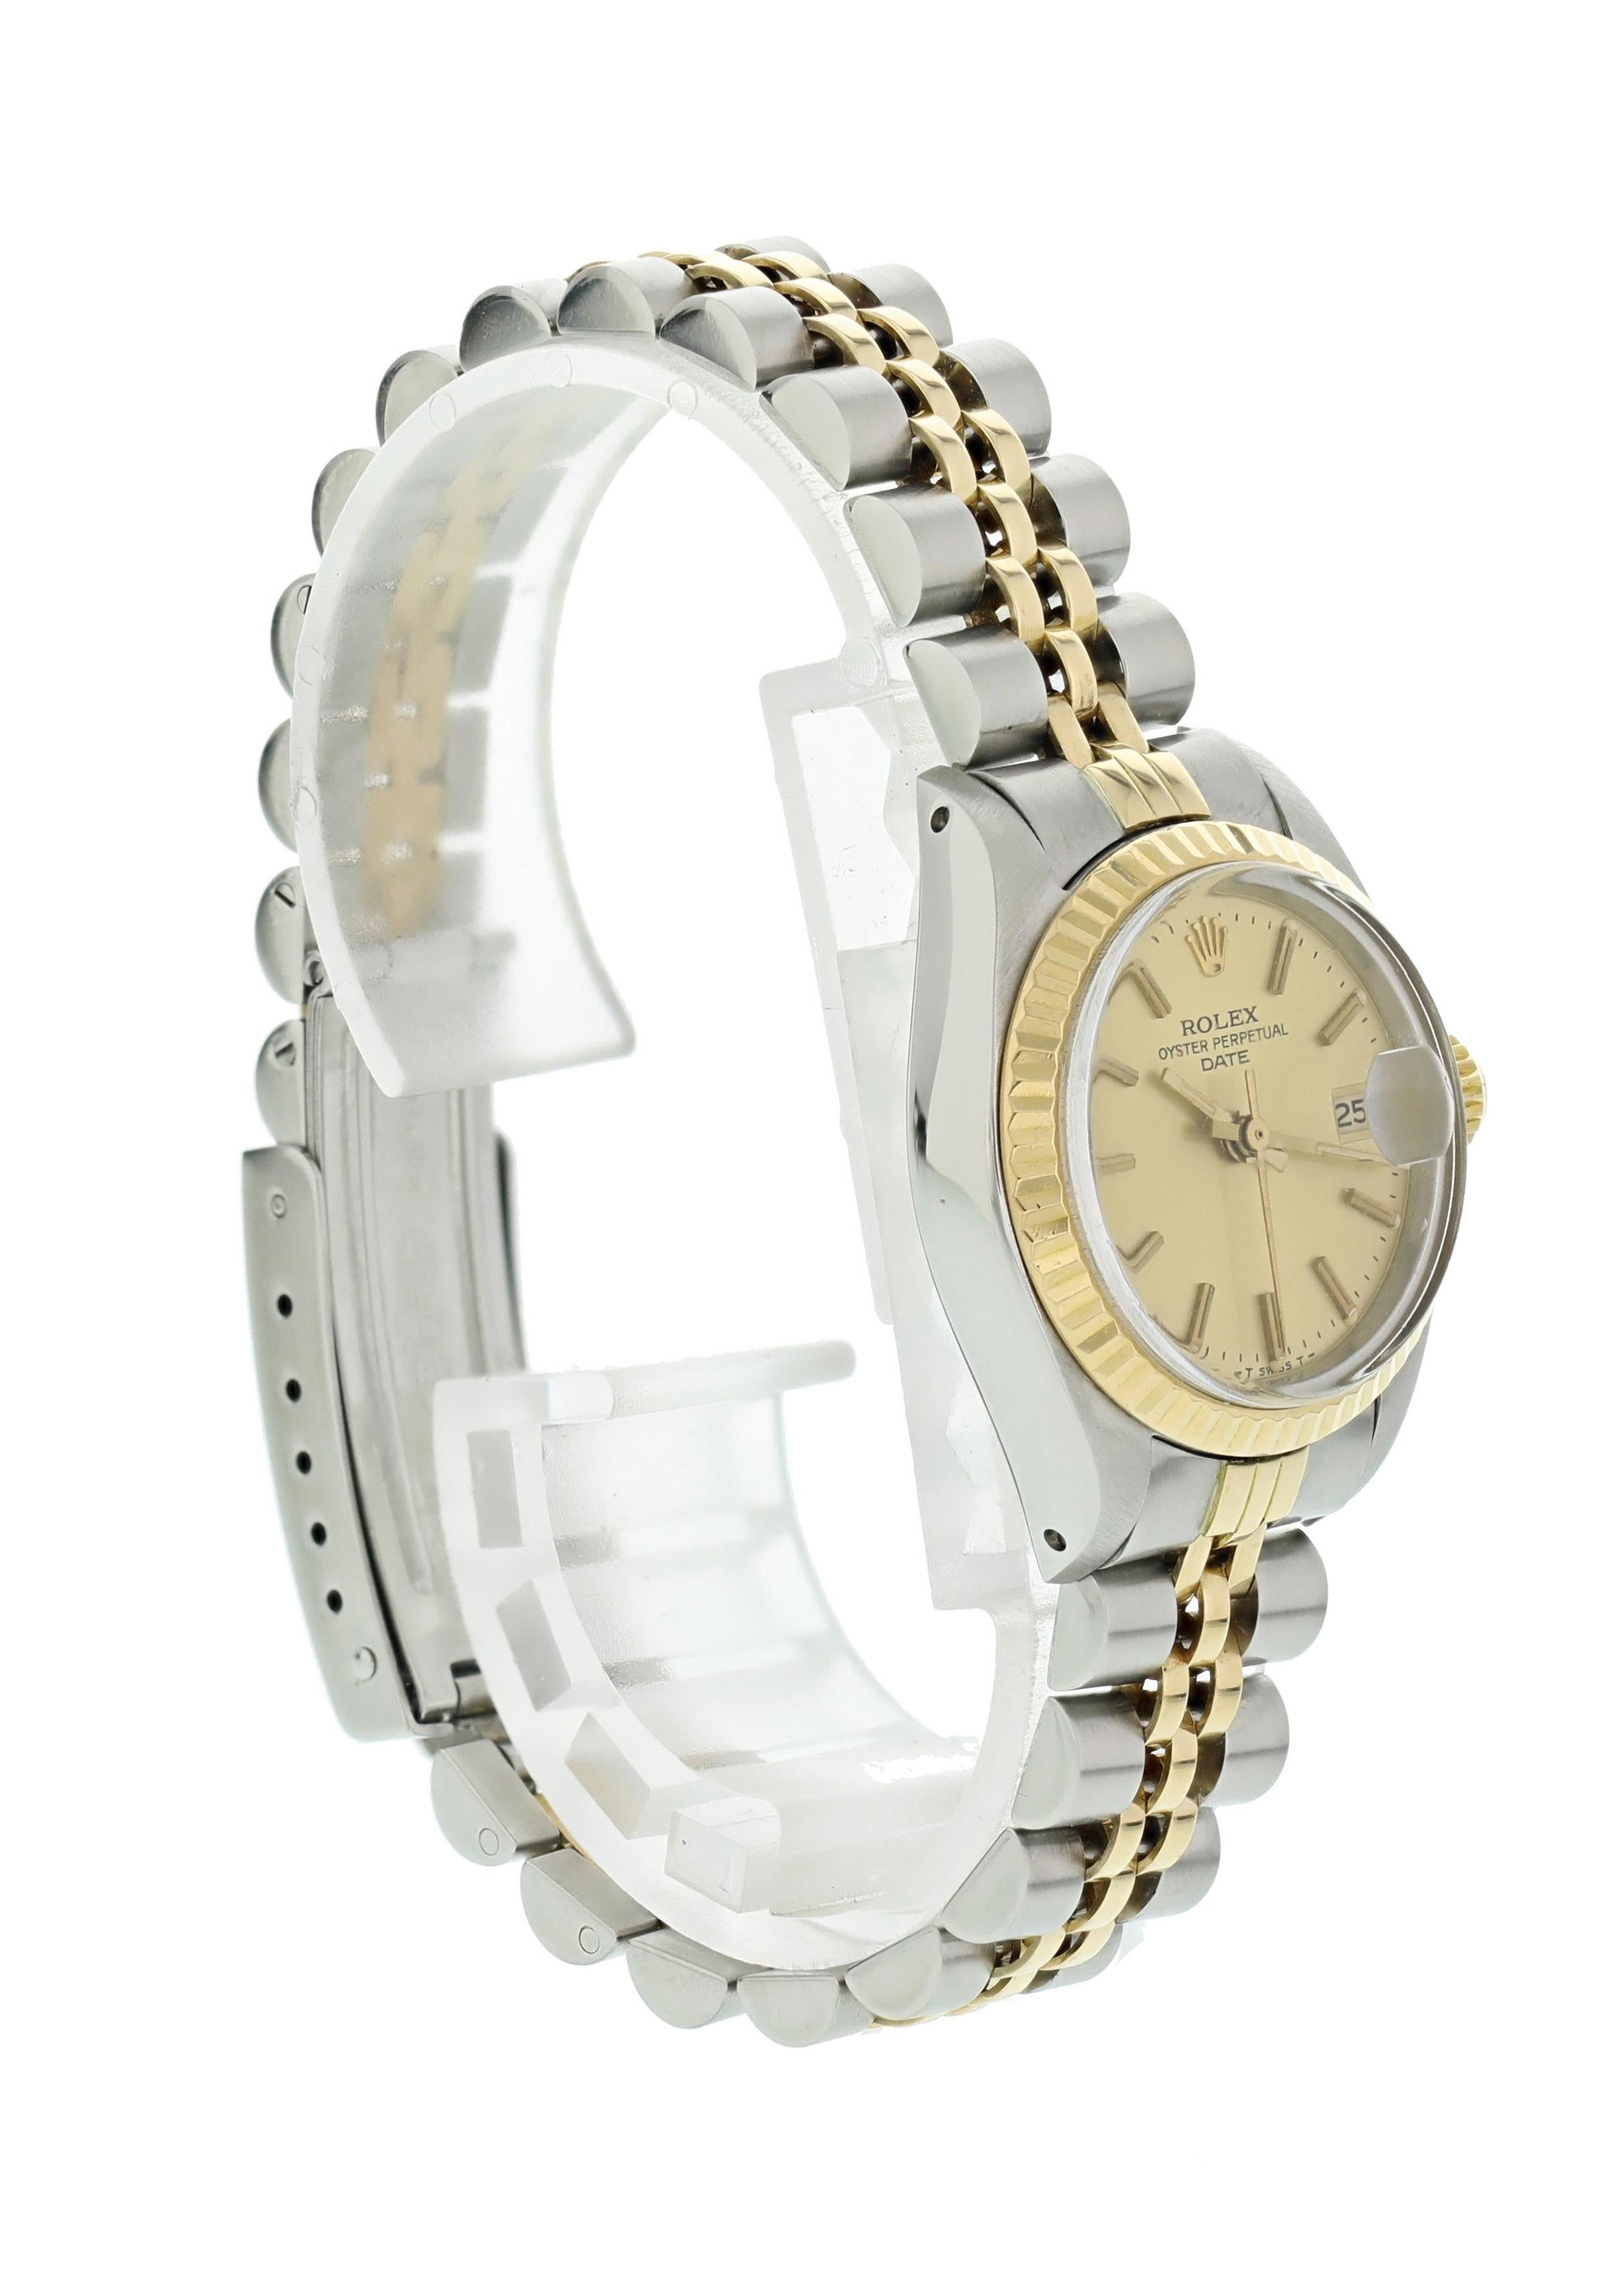 Rolex Oyster Perpetual Date 6917 Ladies Watch In Good Condition For Sale In New York, NY